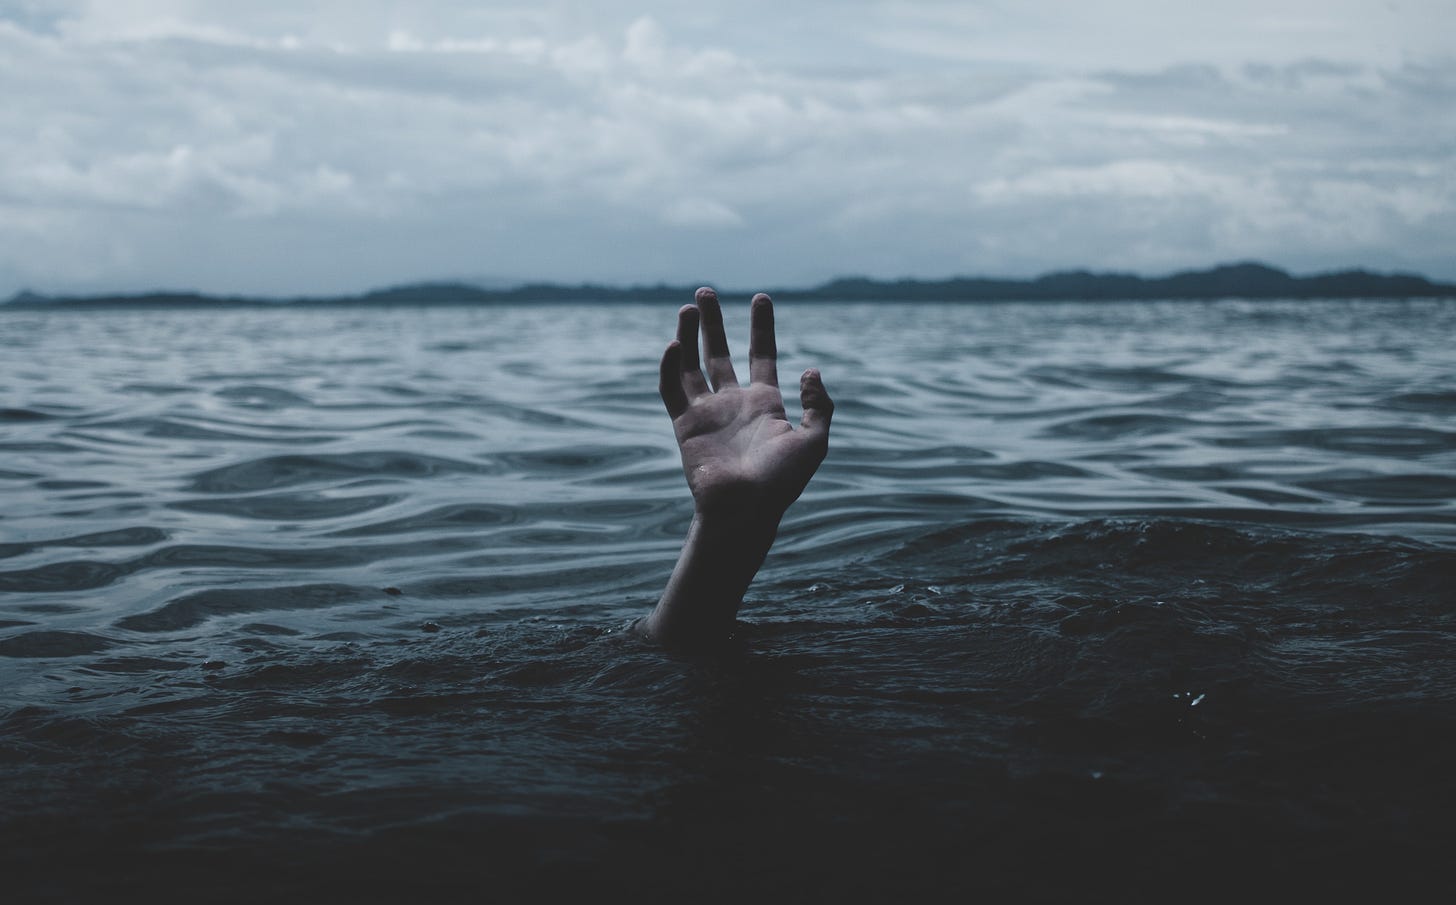 Photo of a single hand reaching out of dark waters on a gloomy lake.